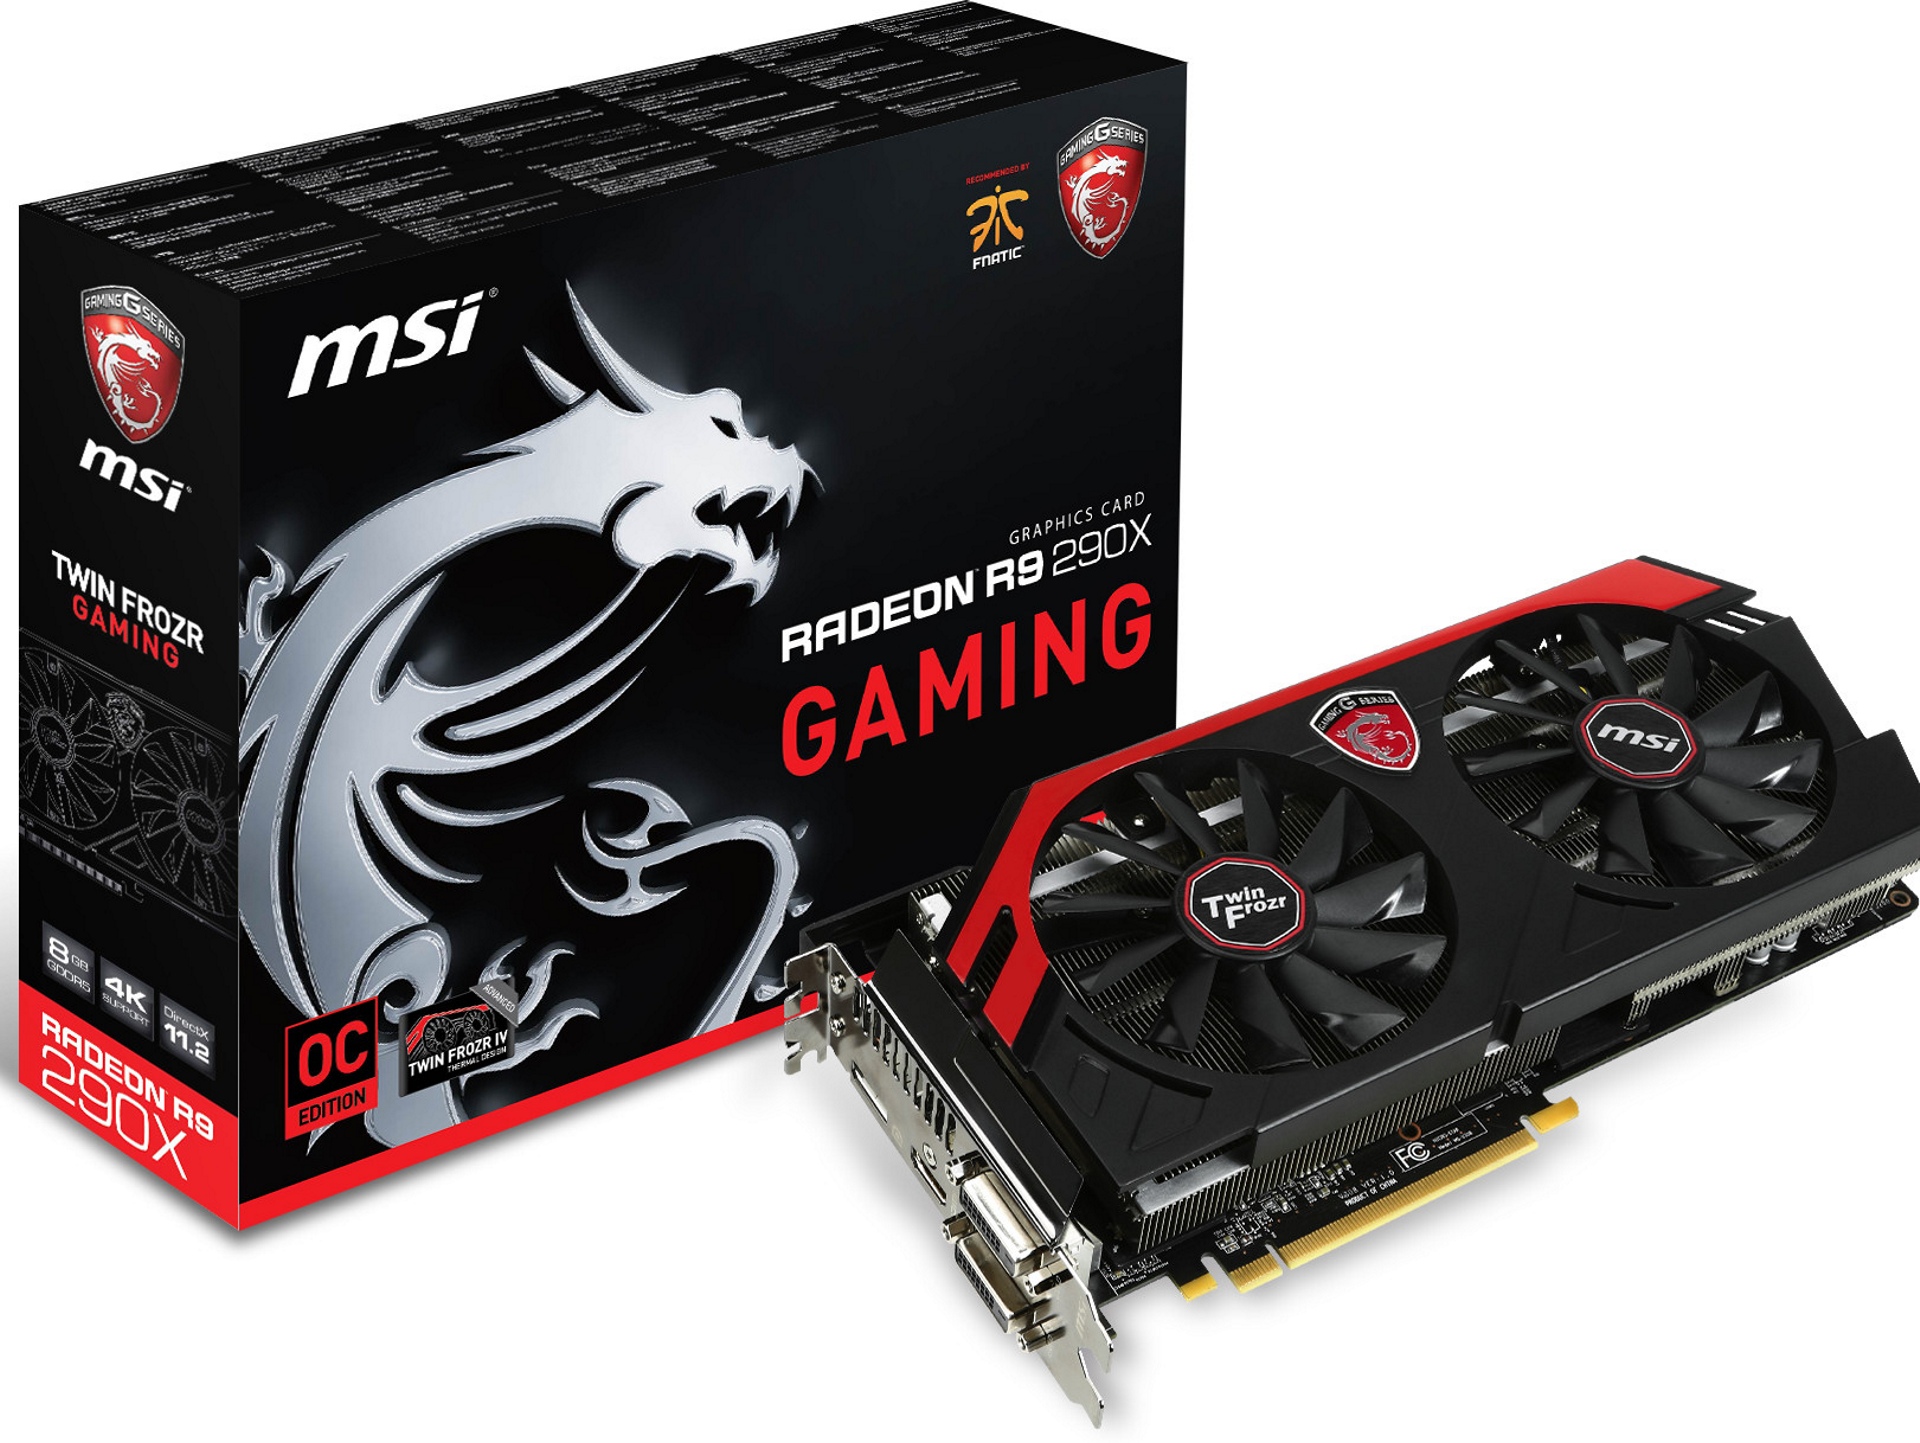 Media asset in full size related to 3dfxzone.it news item entitled as follows: MSI annuncia la video card factory-overclocked R9 290X GAMING 8G | Image Name: news21829_MSI-R9-290X-GAMING-8G_5.jpg